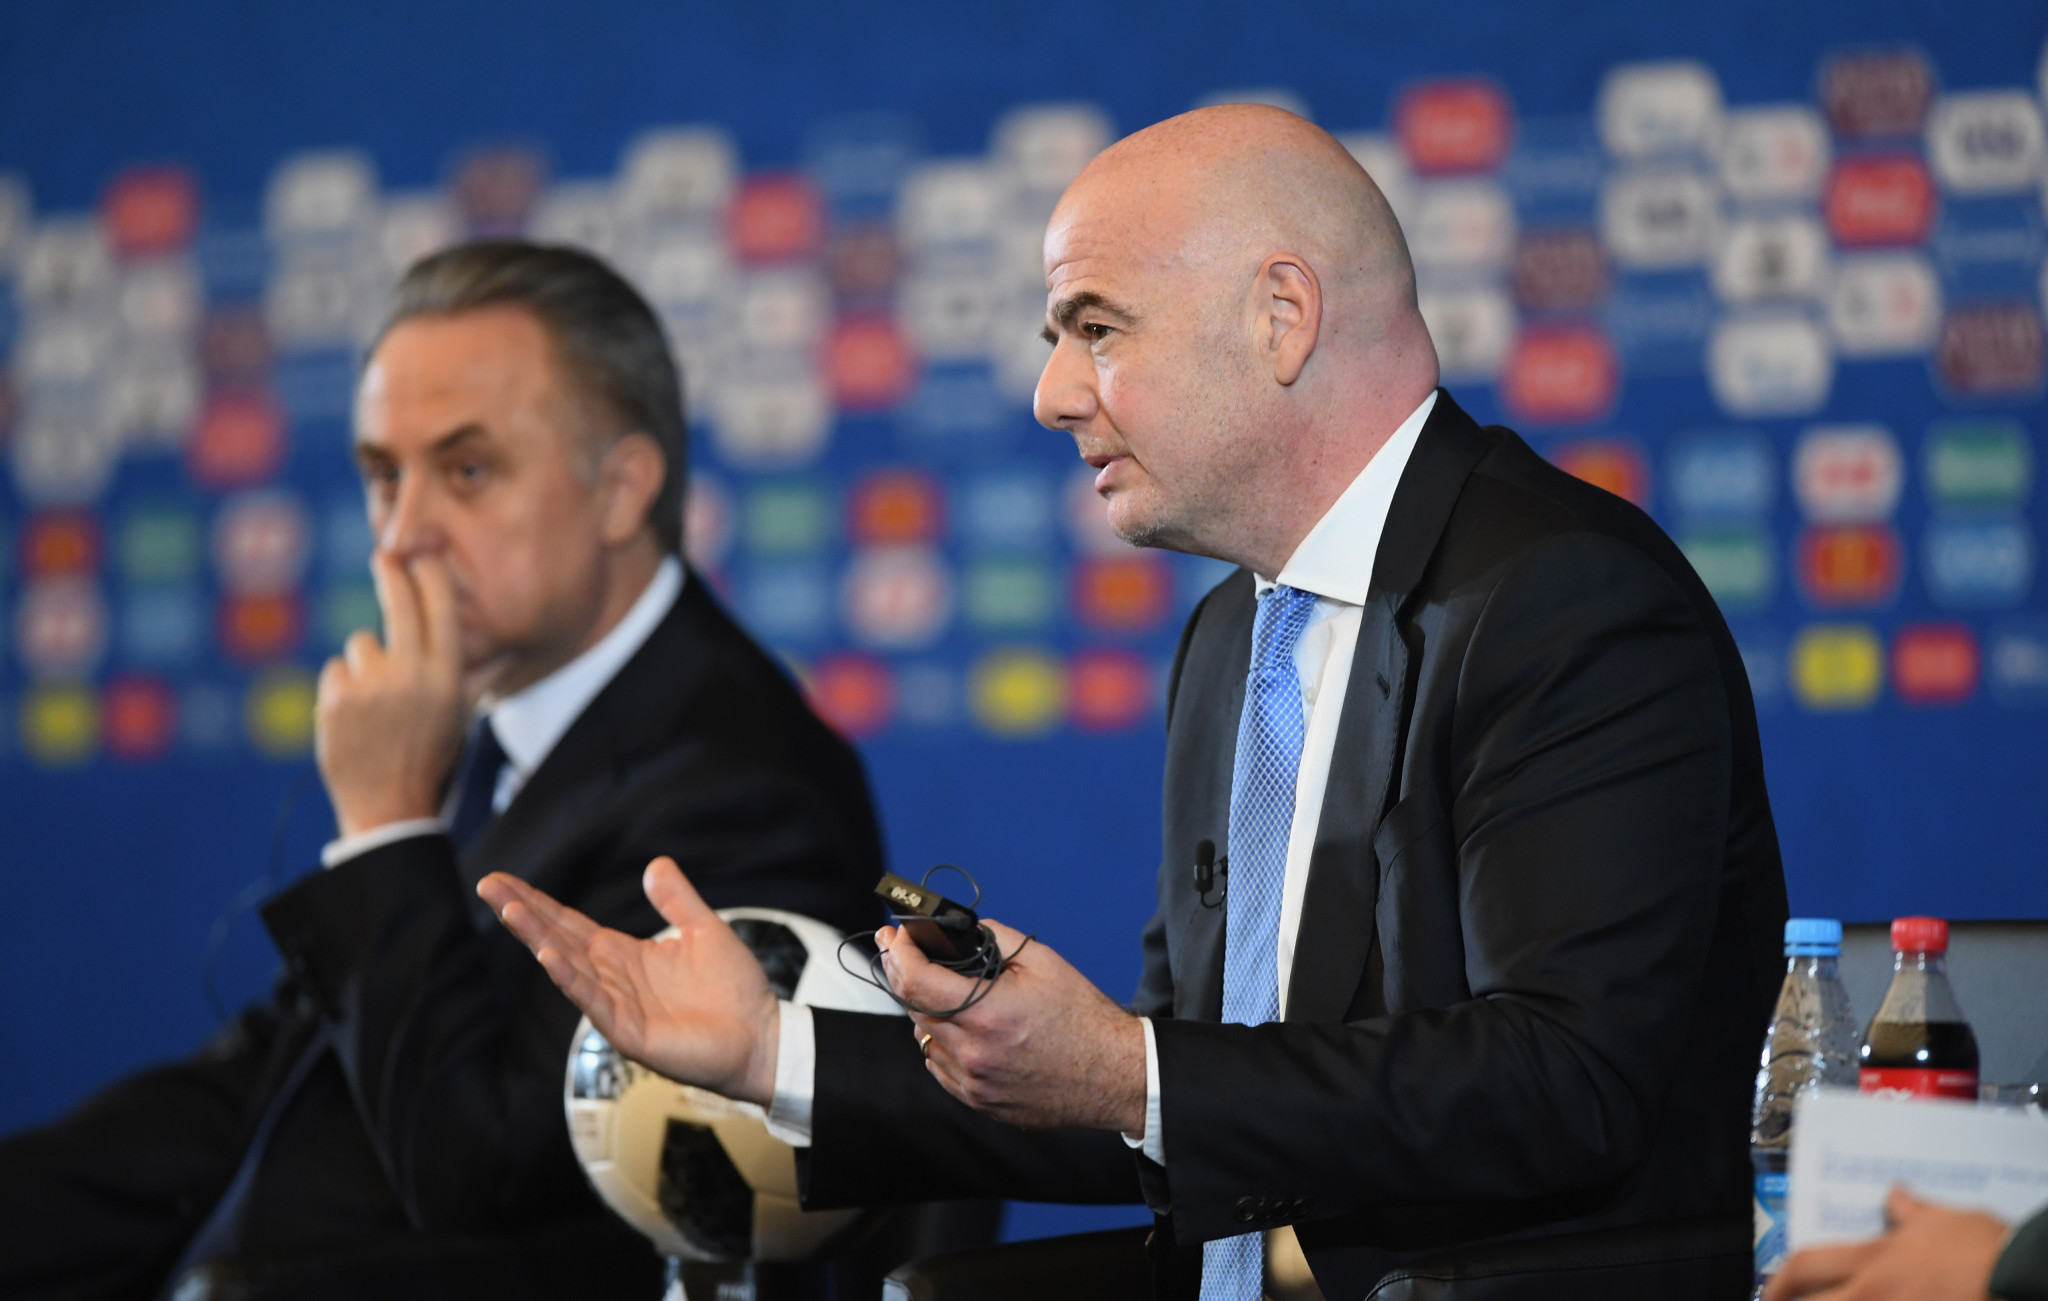 Russia's Deputy Prime Minister Vitaly Mutko was speaking alongside FIFA President Gianni Infantino at a press conference prior to the draw for today's 2018 FIFA World Cup ©Getty Images